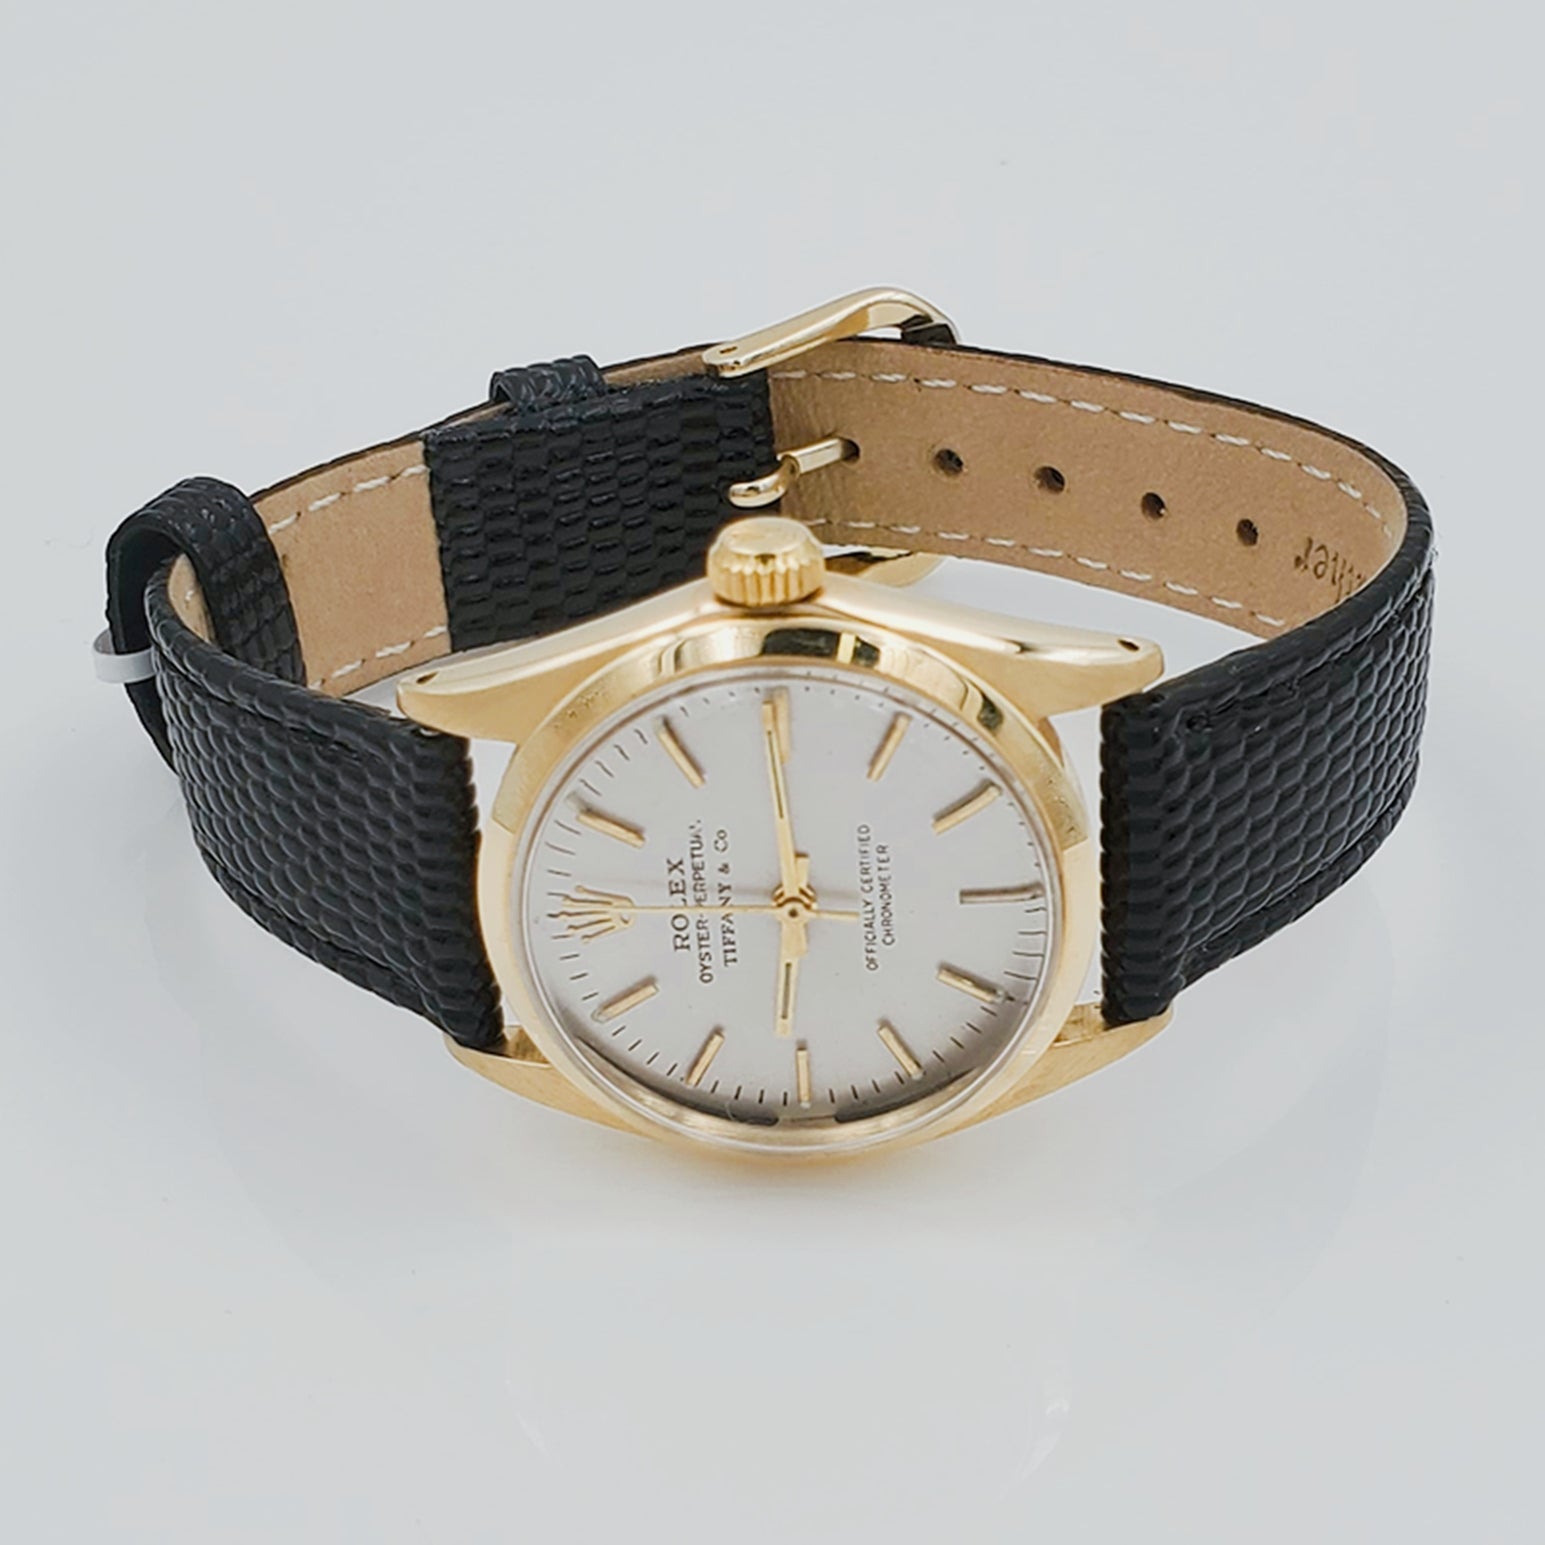 Men's Rolex 30mm Vintage Tiffany & Co. Oyster Perpetual 14K Yellow Gold Watch with Black Leather Strap and Off-White Dial. (Pre-Owned)